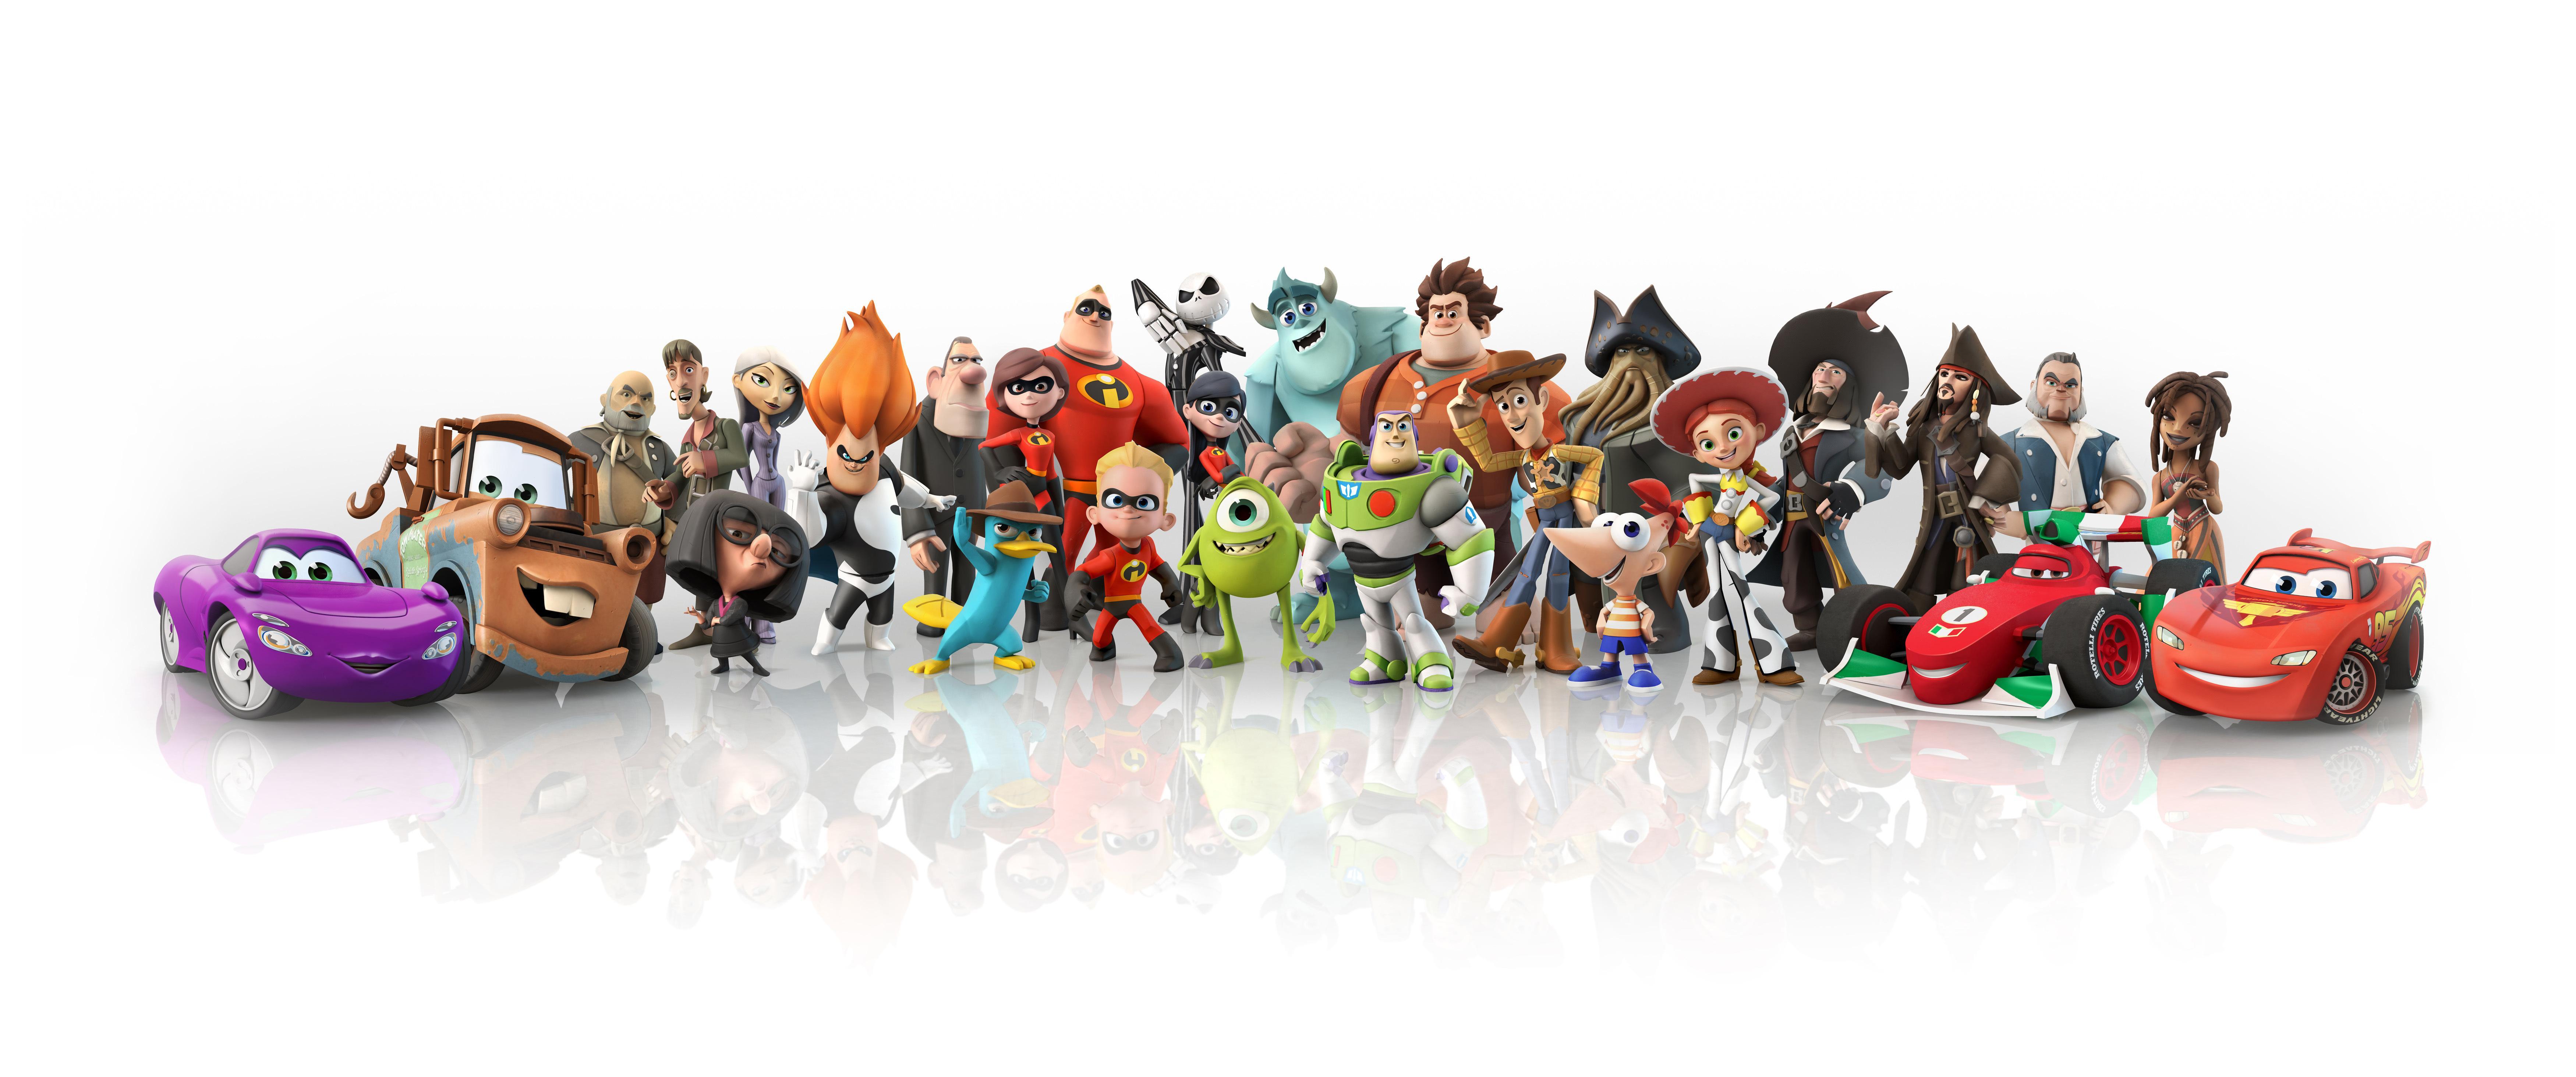 Wallpaper Disney Infinity, Incredibles, Monsters, Pirates, Toys